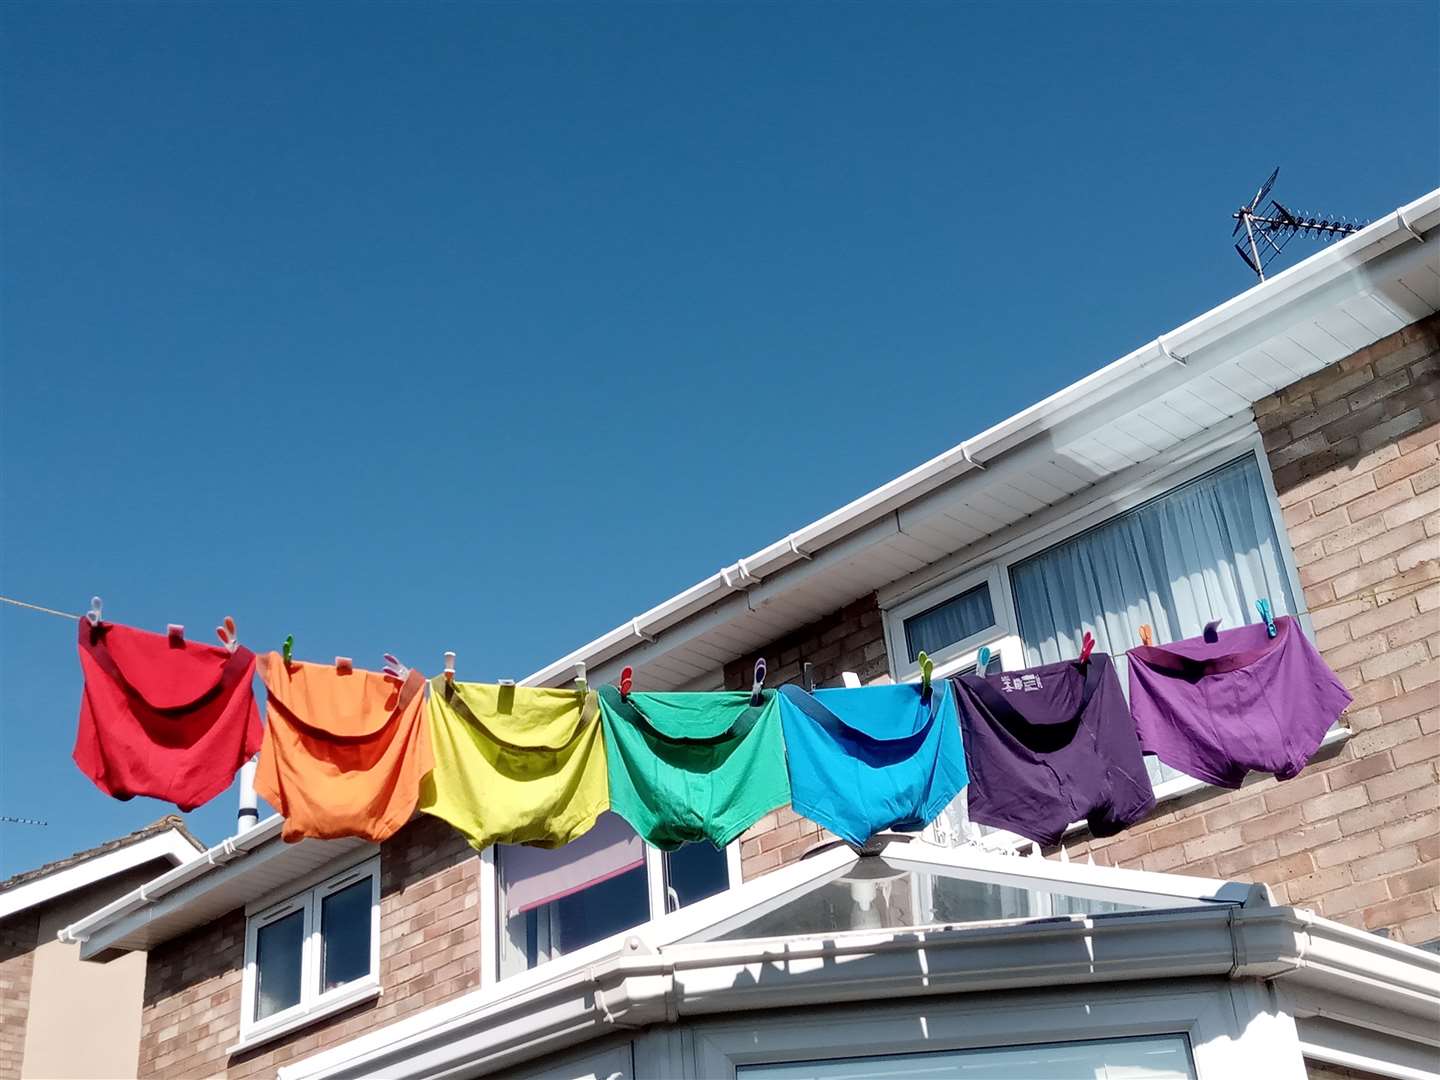 Paela Smith from Maidstone even created a rainbow on washing day.